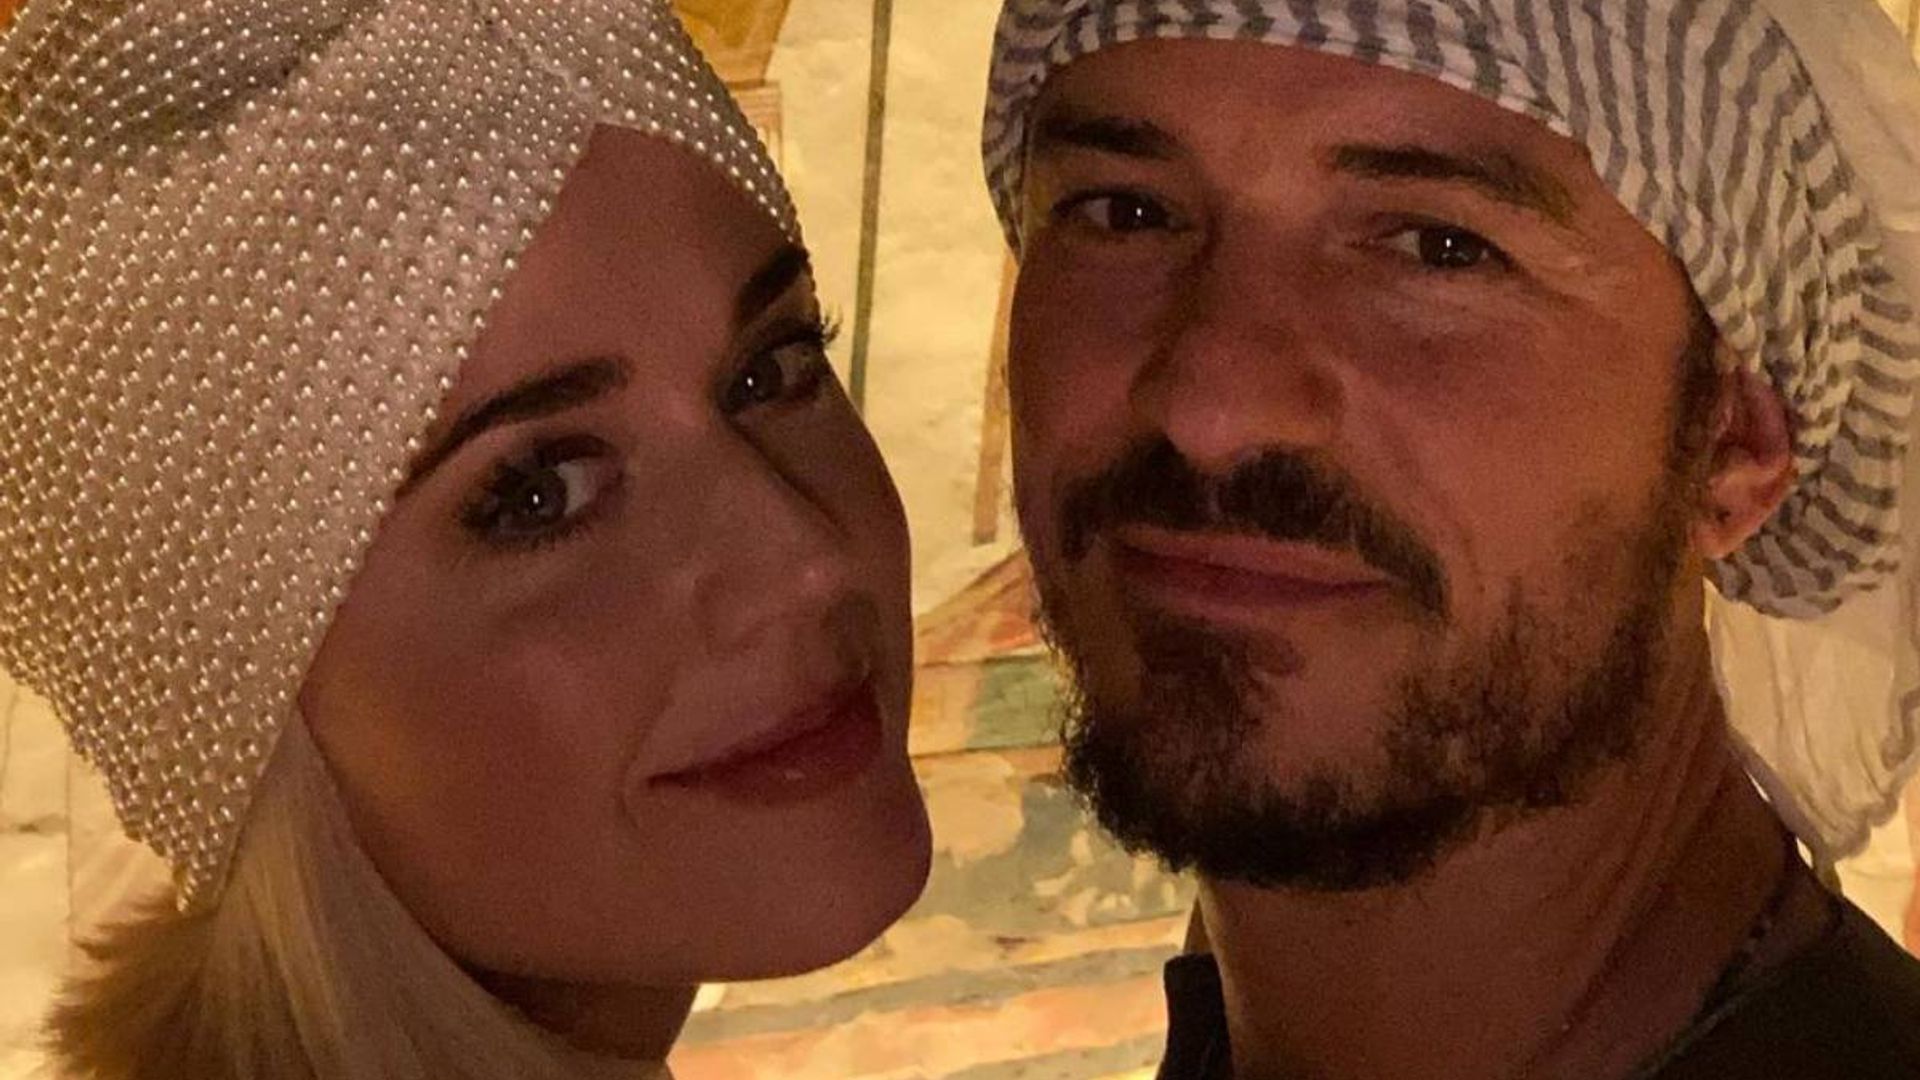 Katy Perry shared an incredible photo featuring baby Daisy during special celebration – did you spot it?